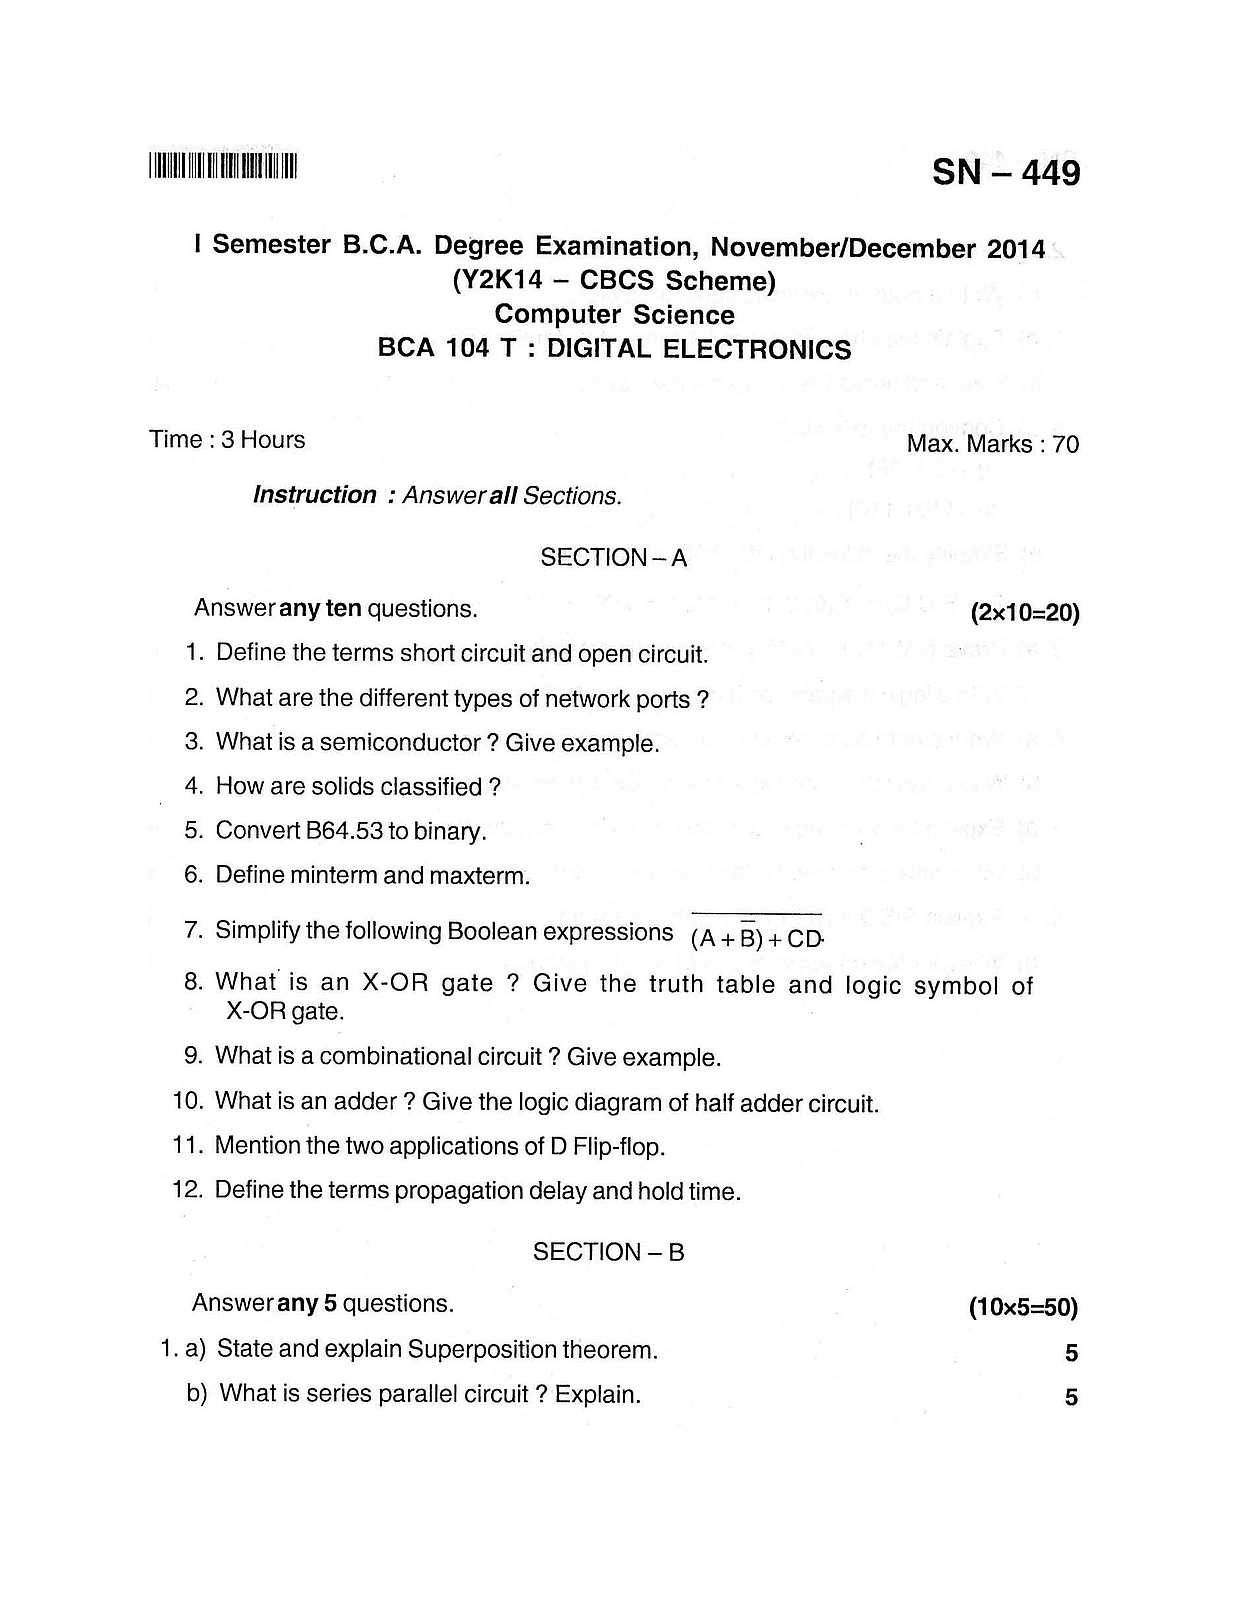 Bangalore University BCA Solved Question Papers 5 